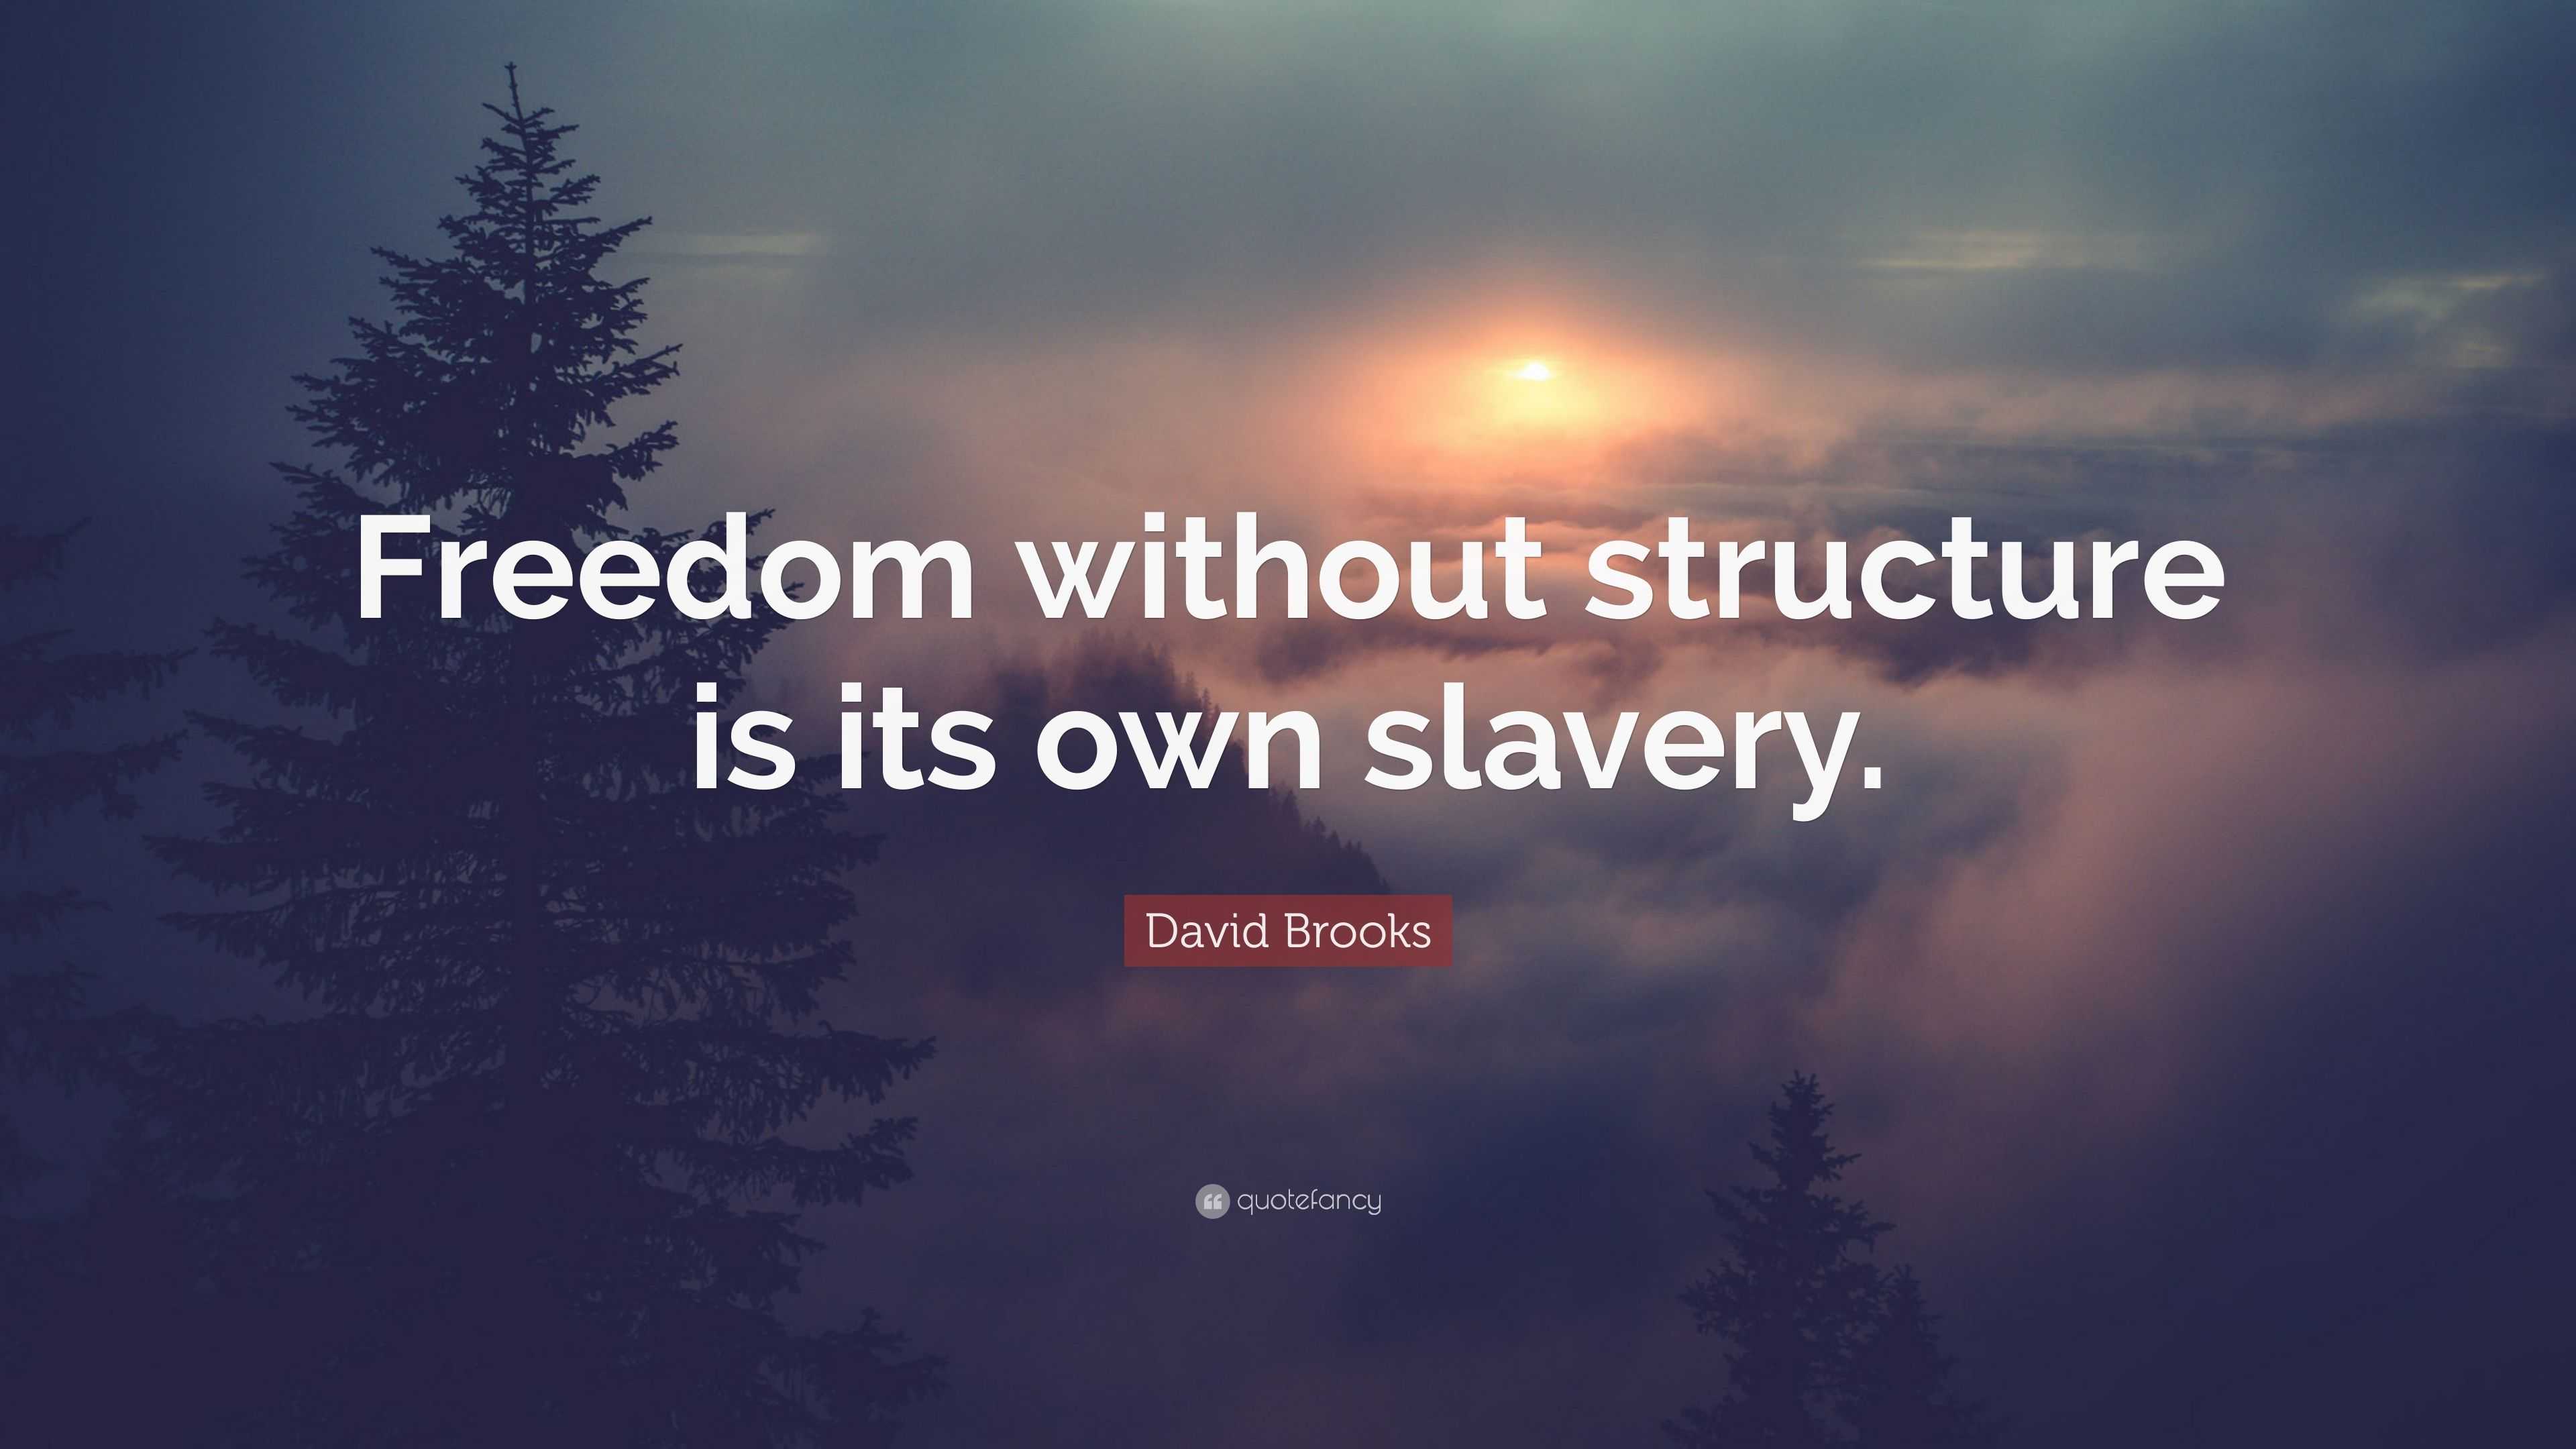 David Brooks Quote: “Freedom without structure is its own slavery.”